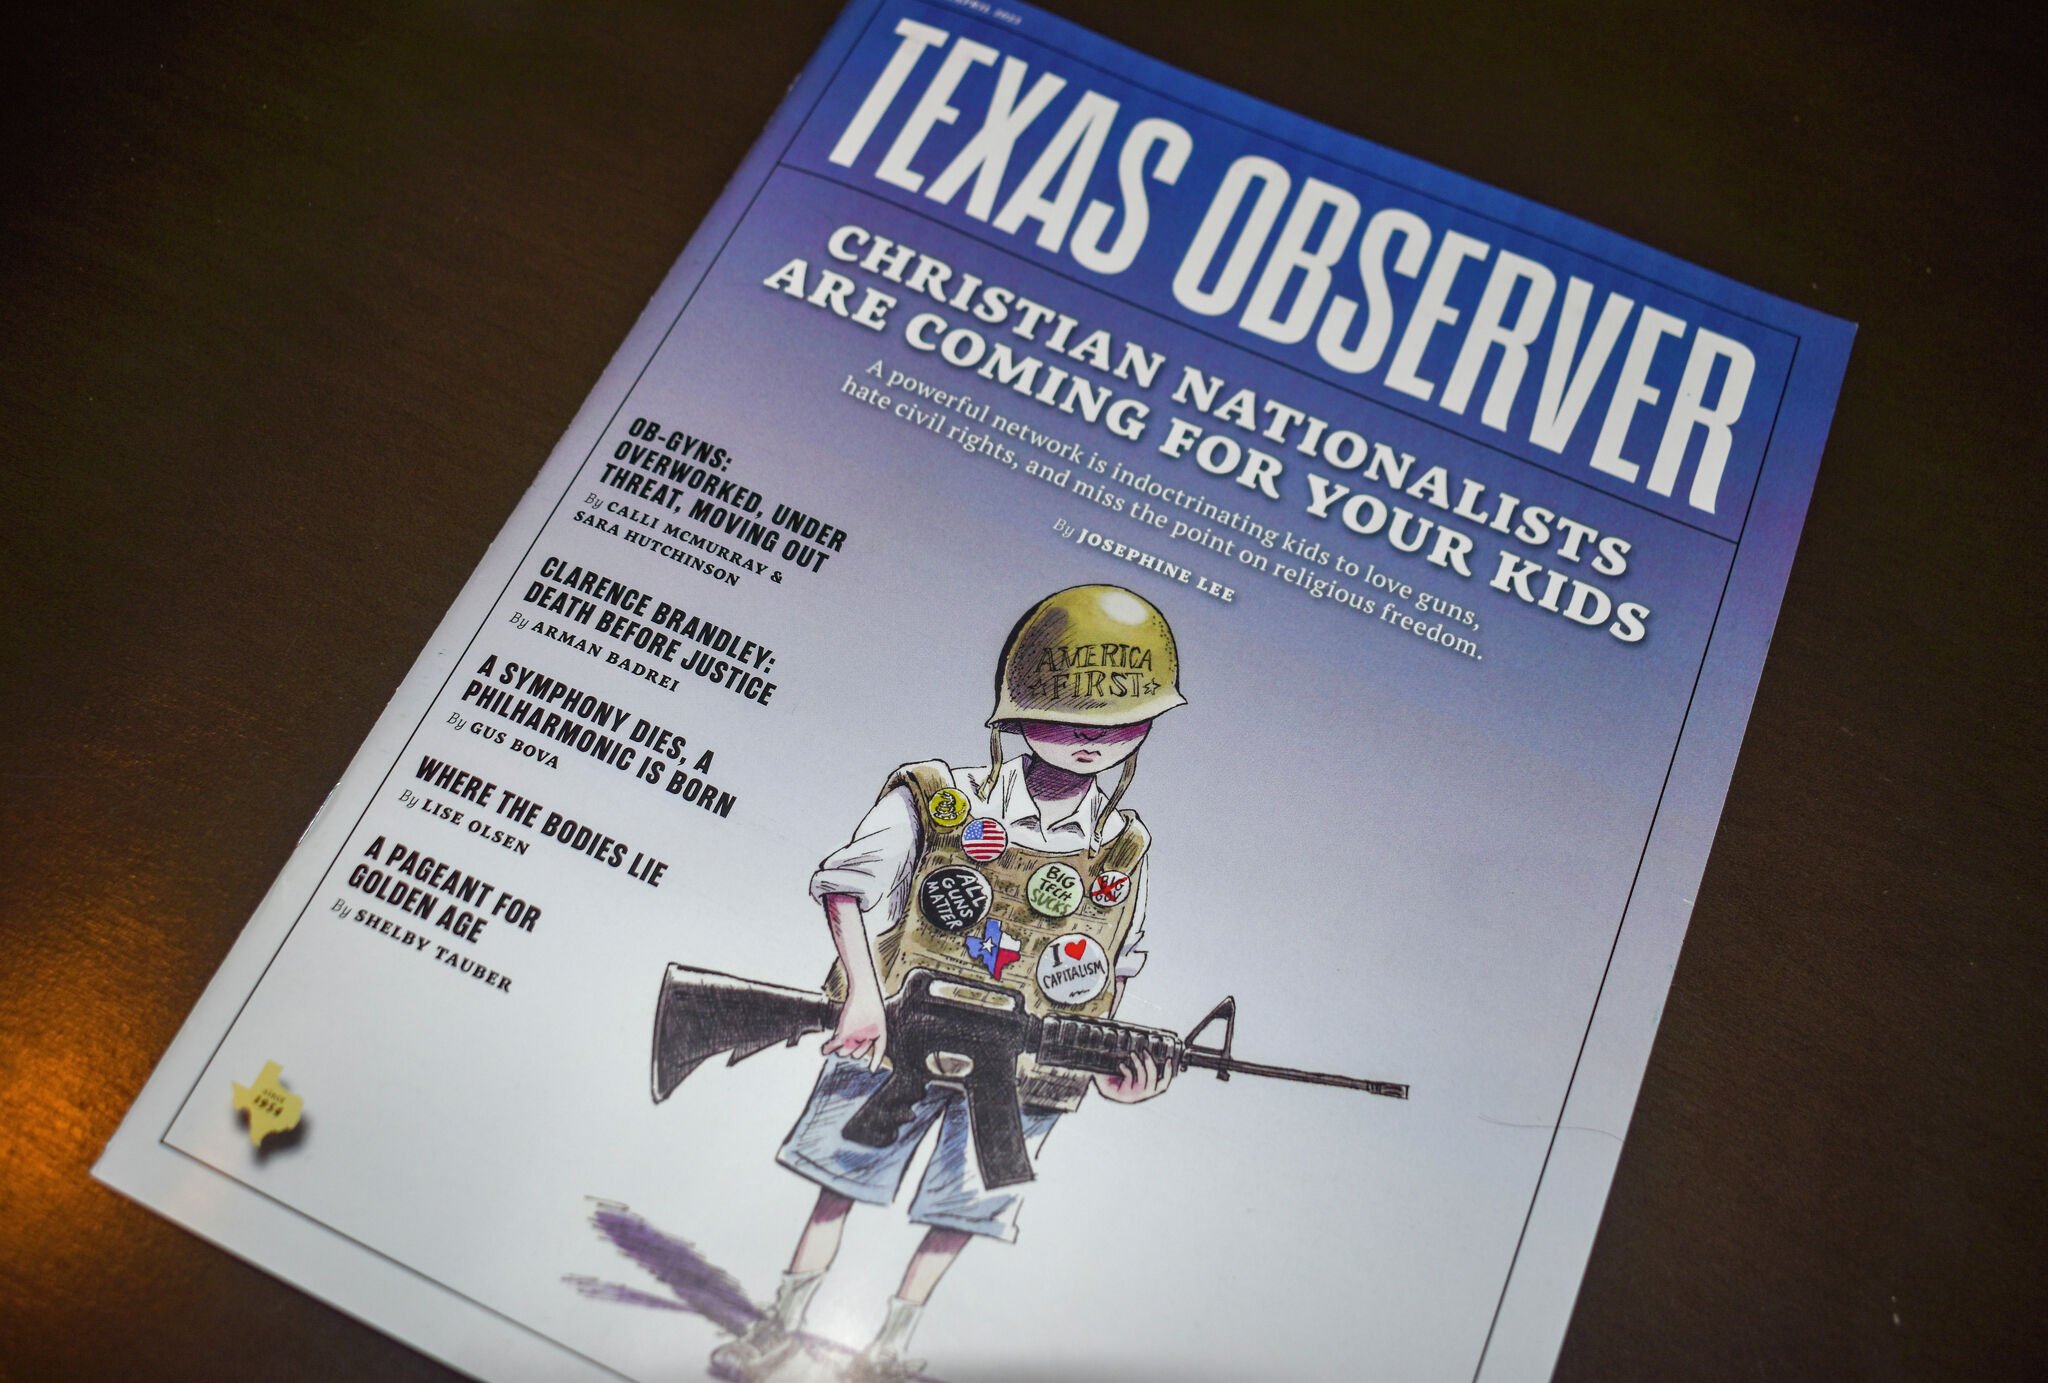 The March/April issue of the Texas Observer